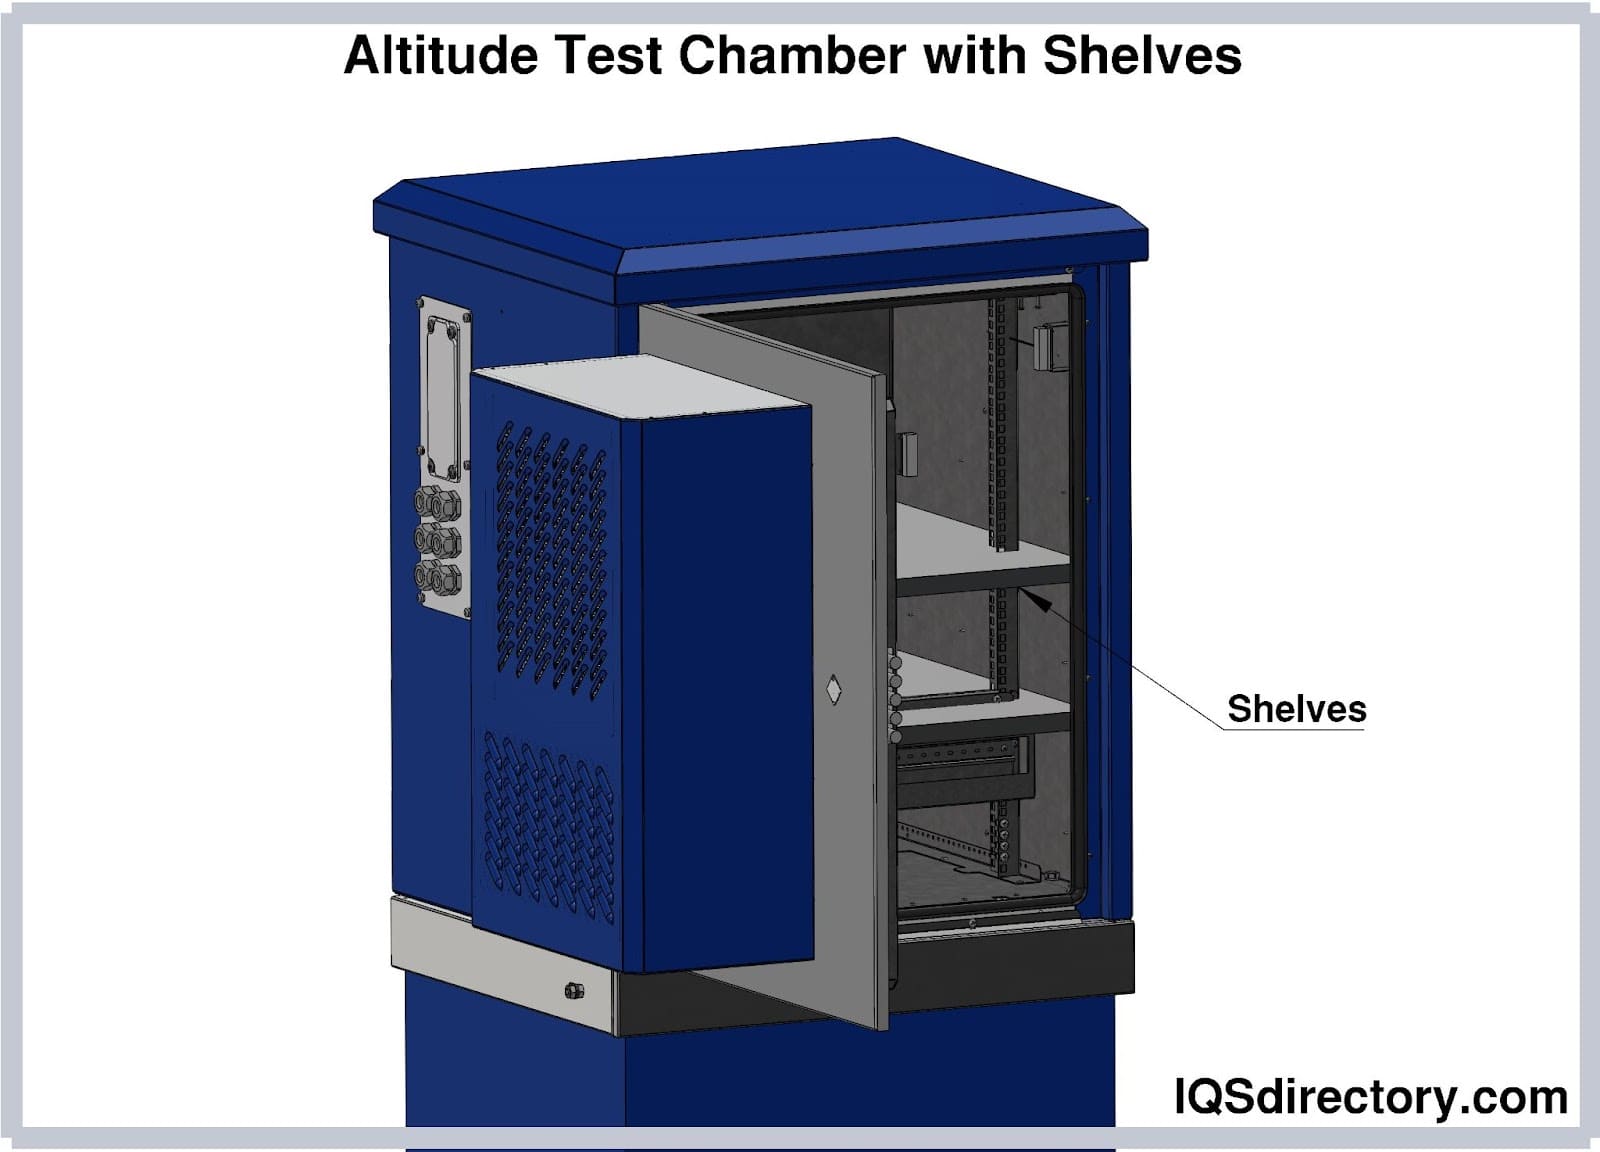 Altitude Test Chamber with Shelves